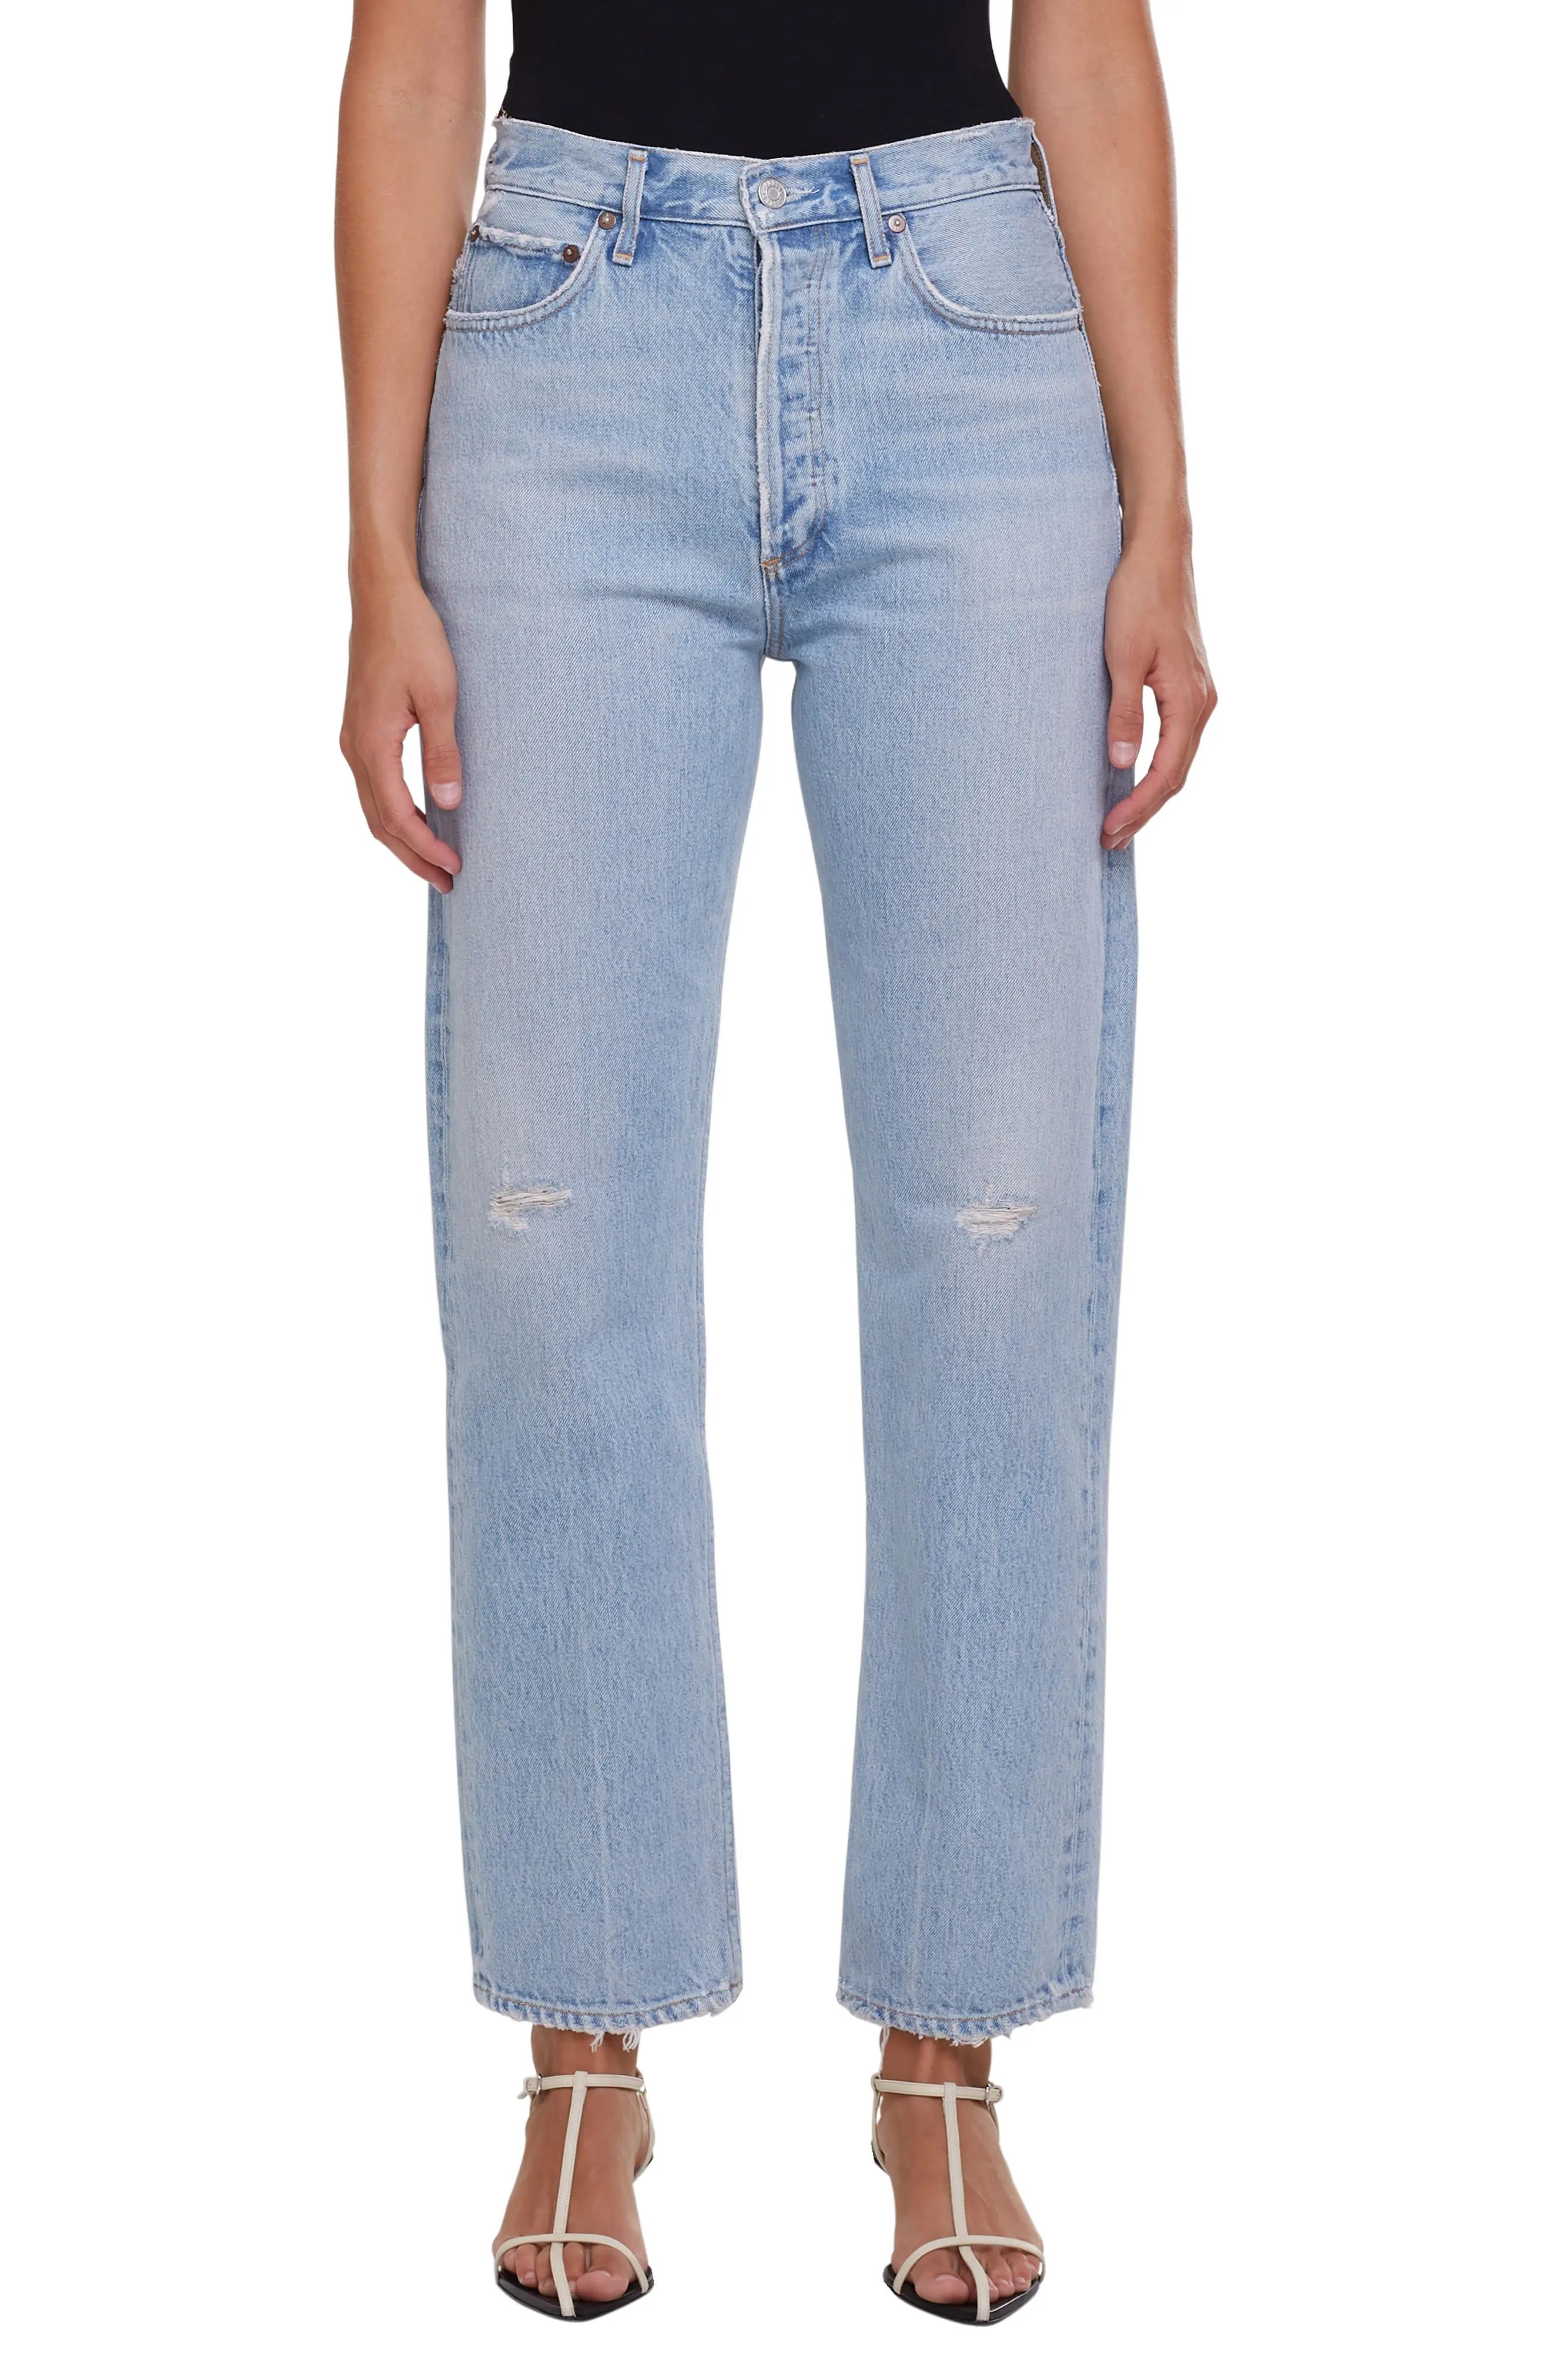 AGOLDE '90s Pinch Waist High Waist Jeans, Size 26 in Flashback at Nordstrom | Nordstrom